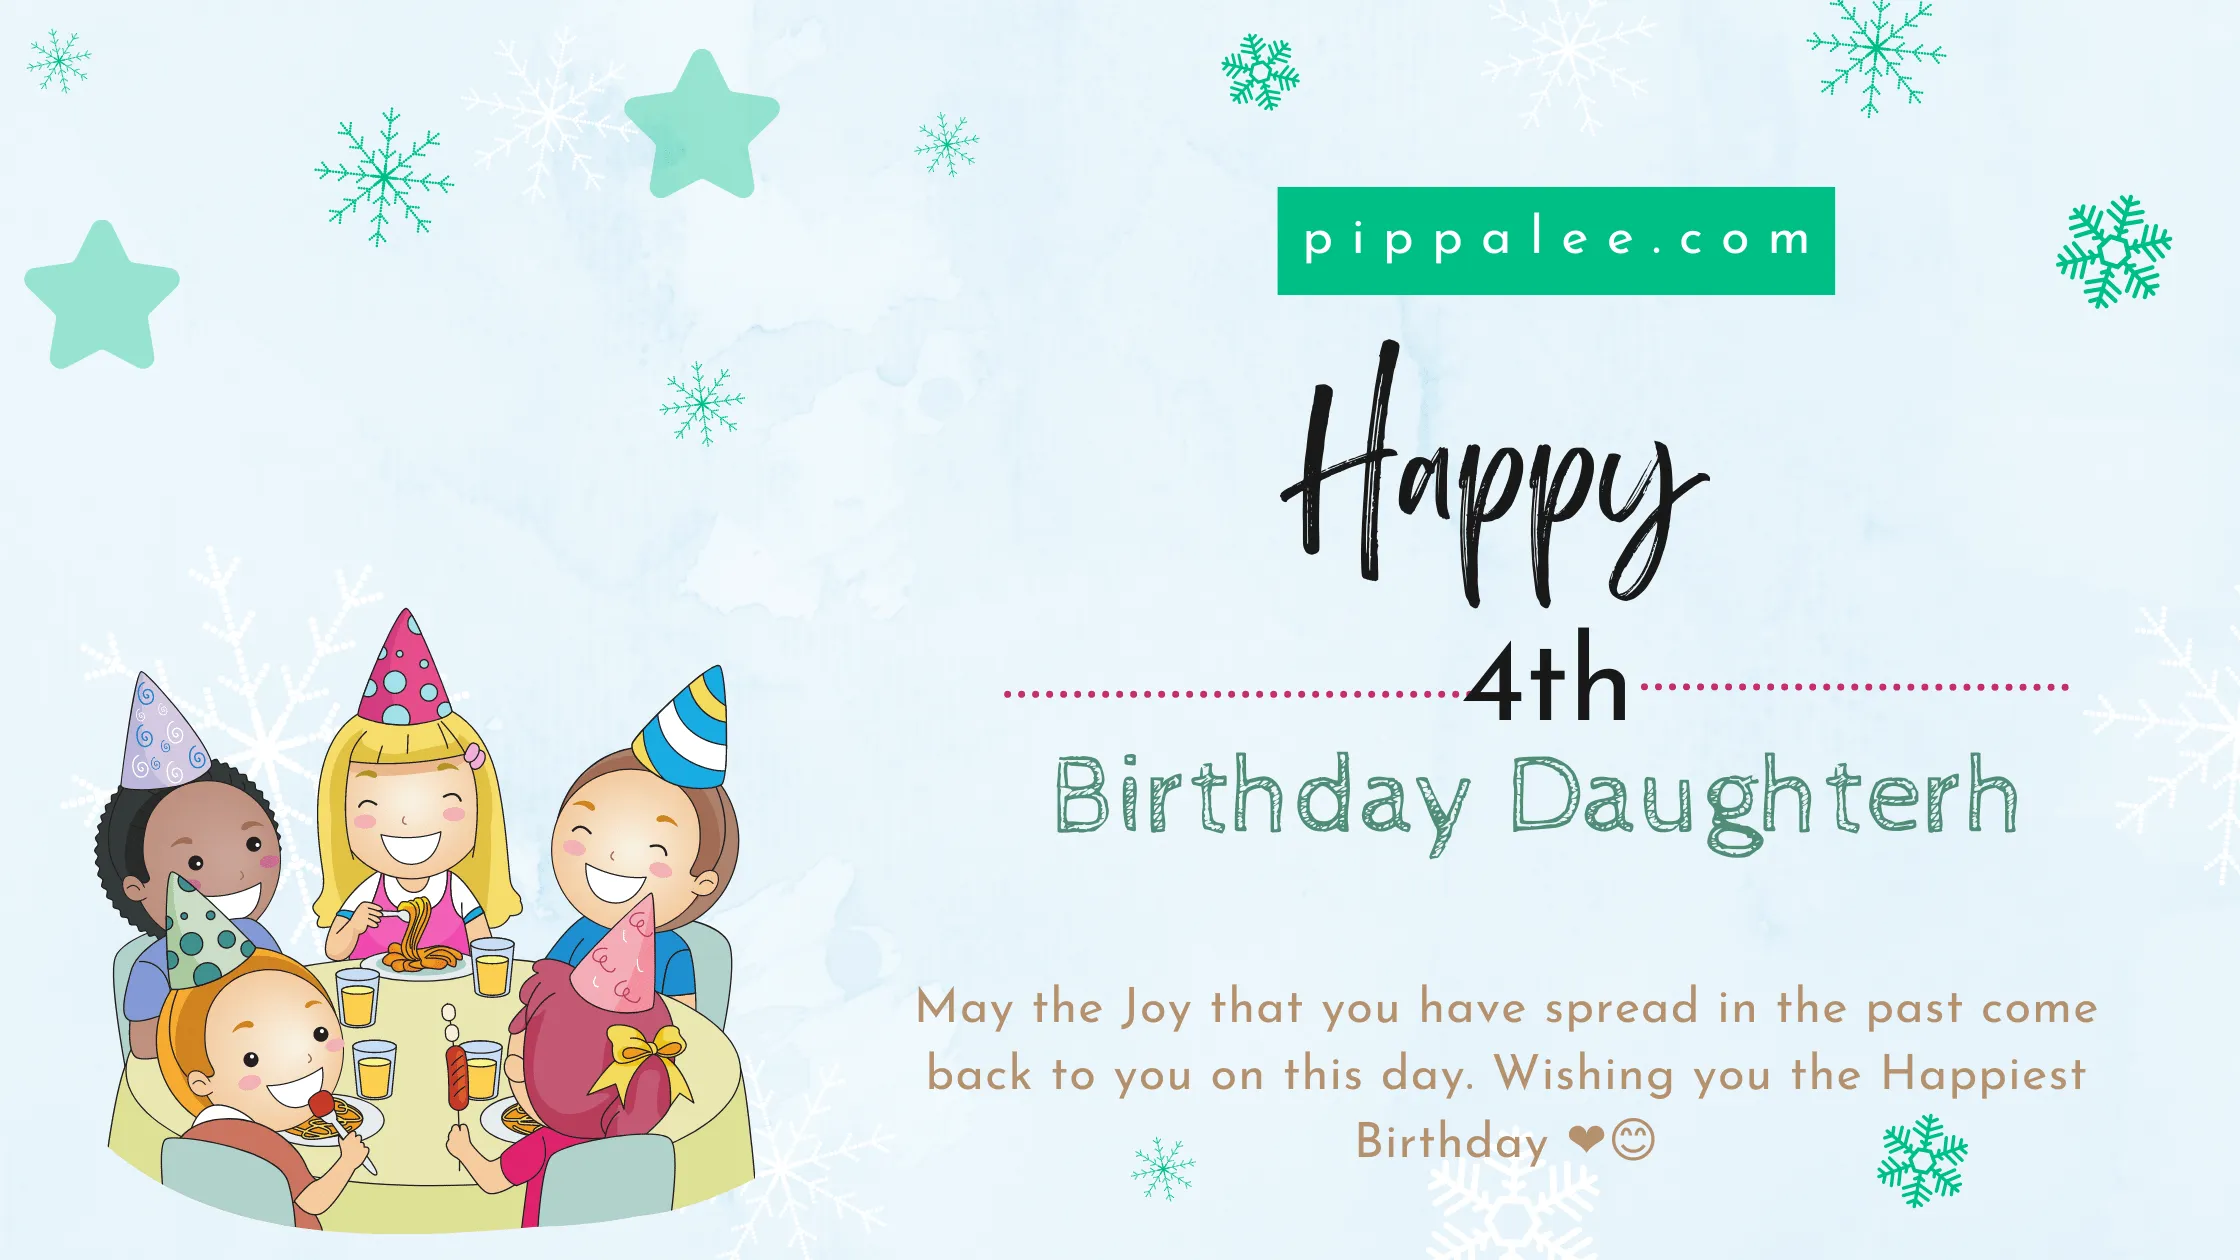 Happy 4th Birthday Daughter - Wishes & Messages